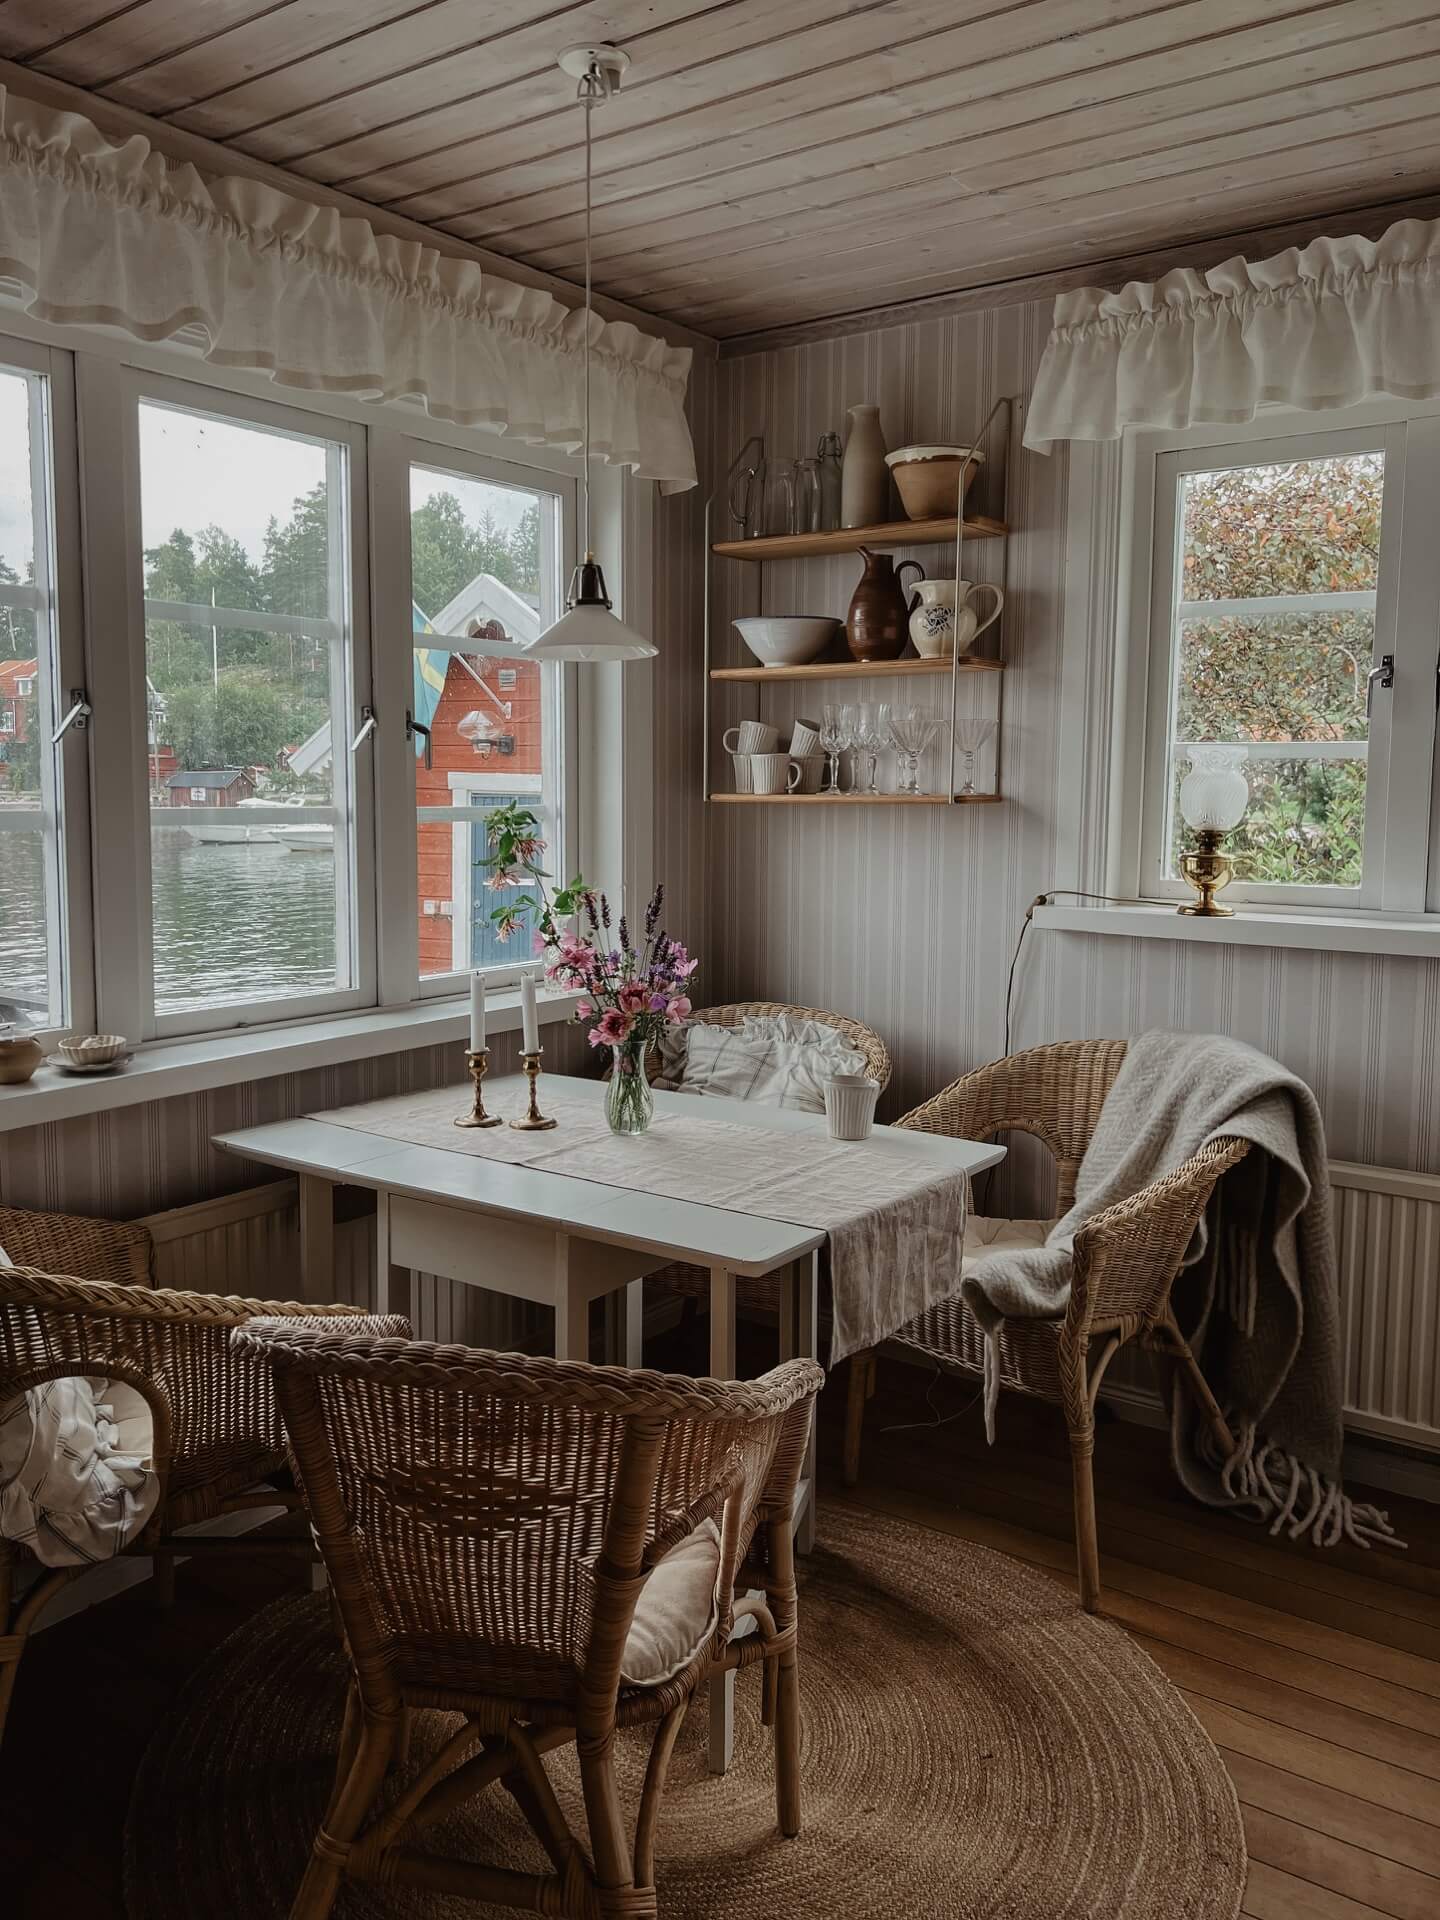 Emelie Sundberg home tour - interior of Swedish home with table and chairs by a window